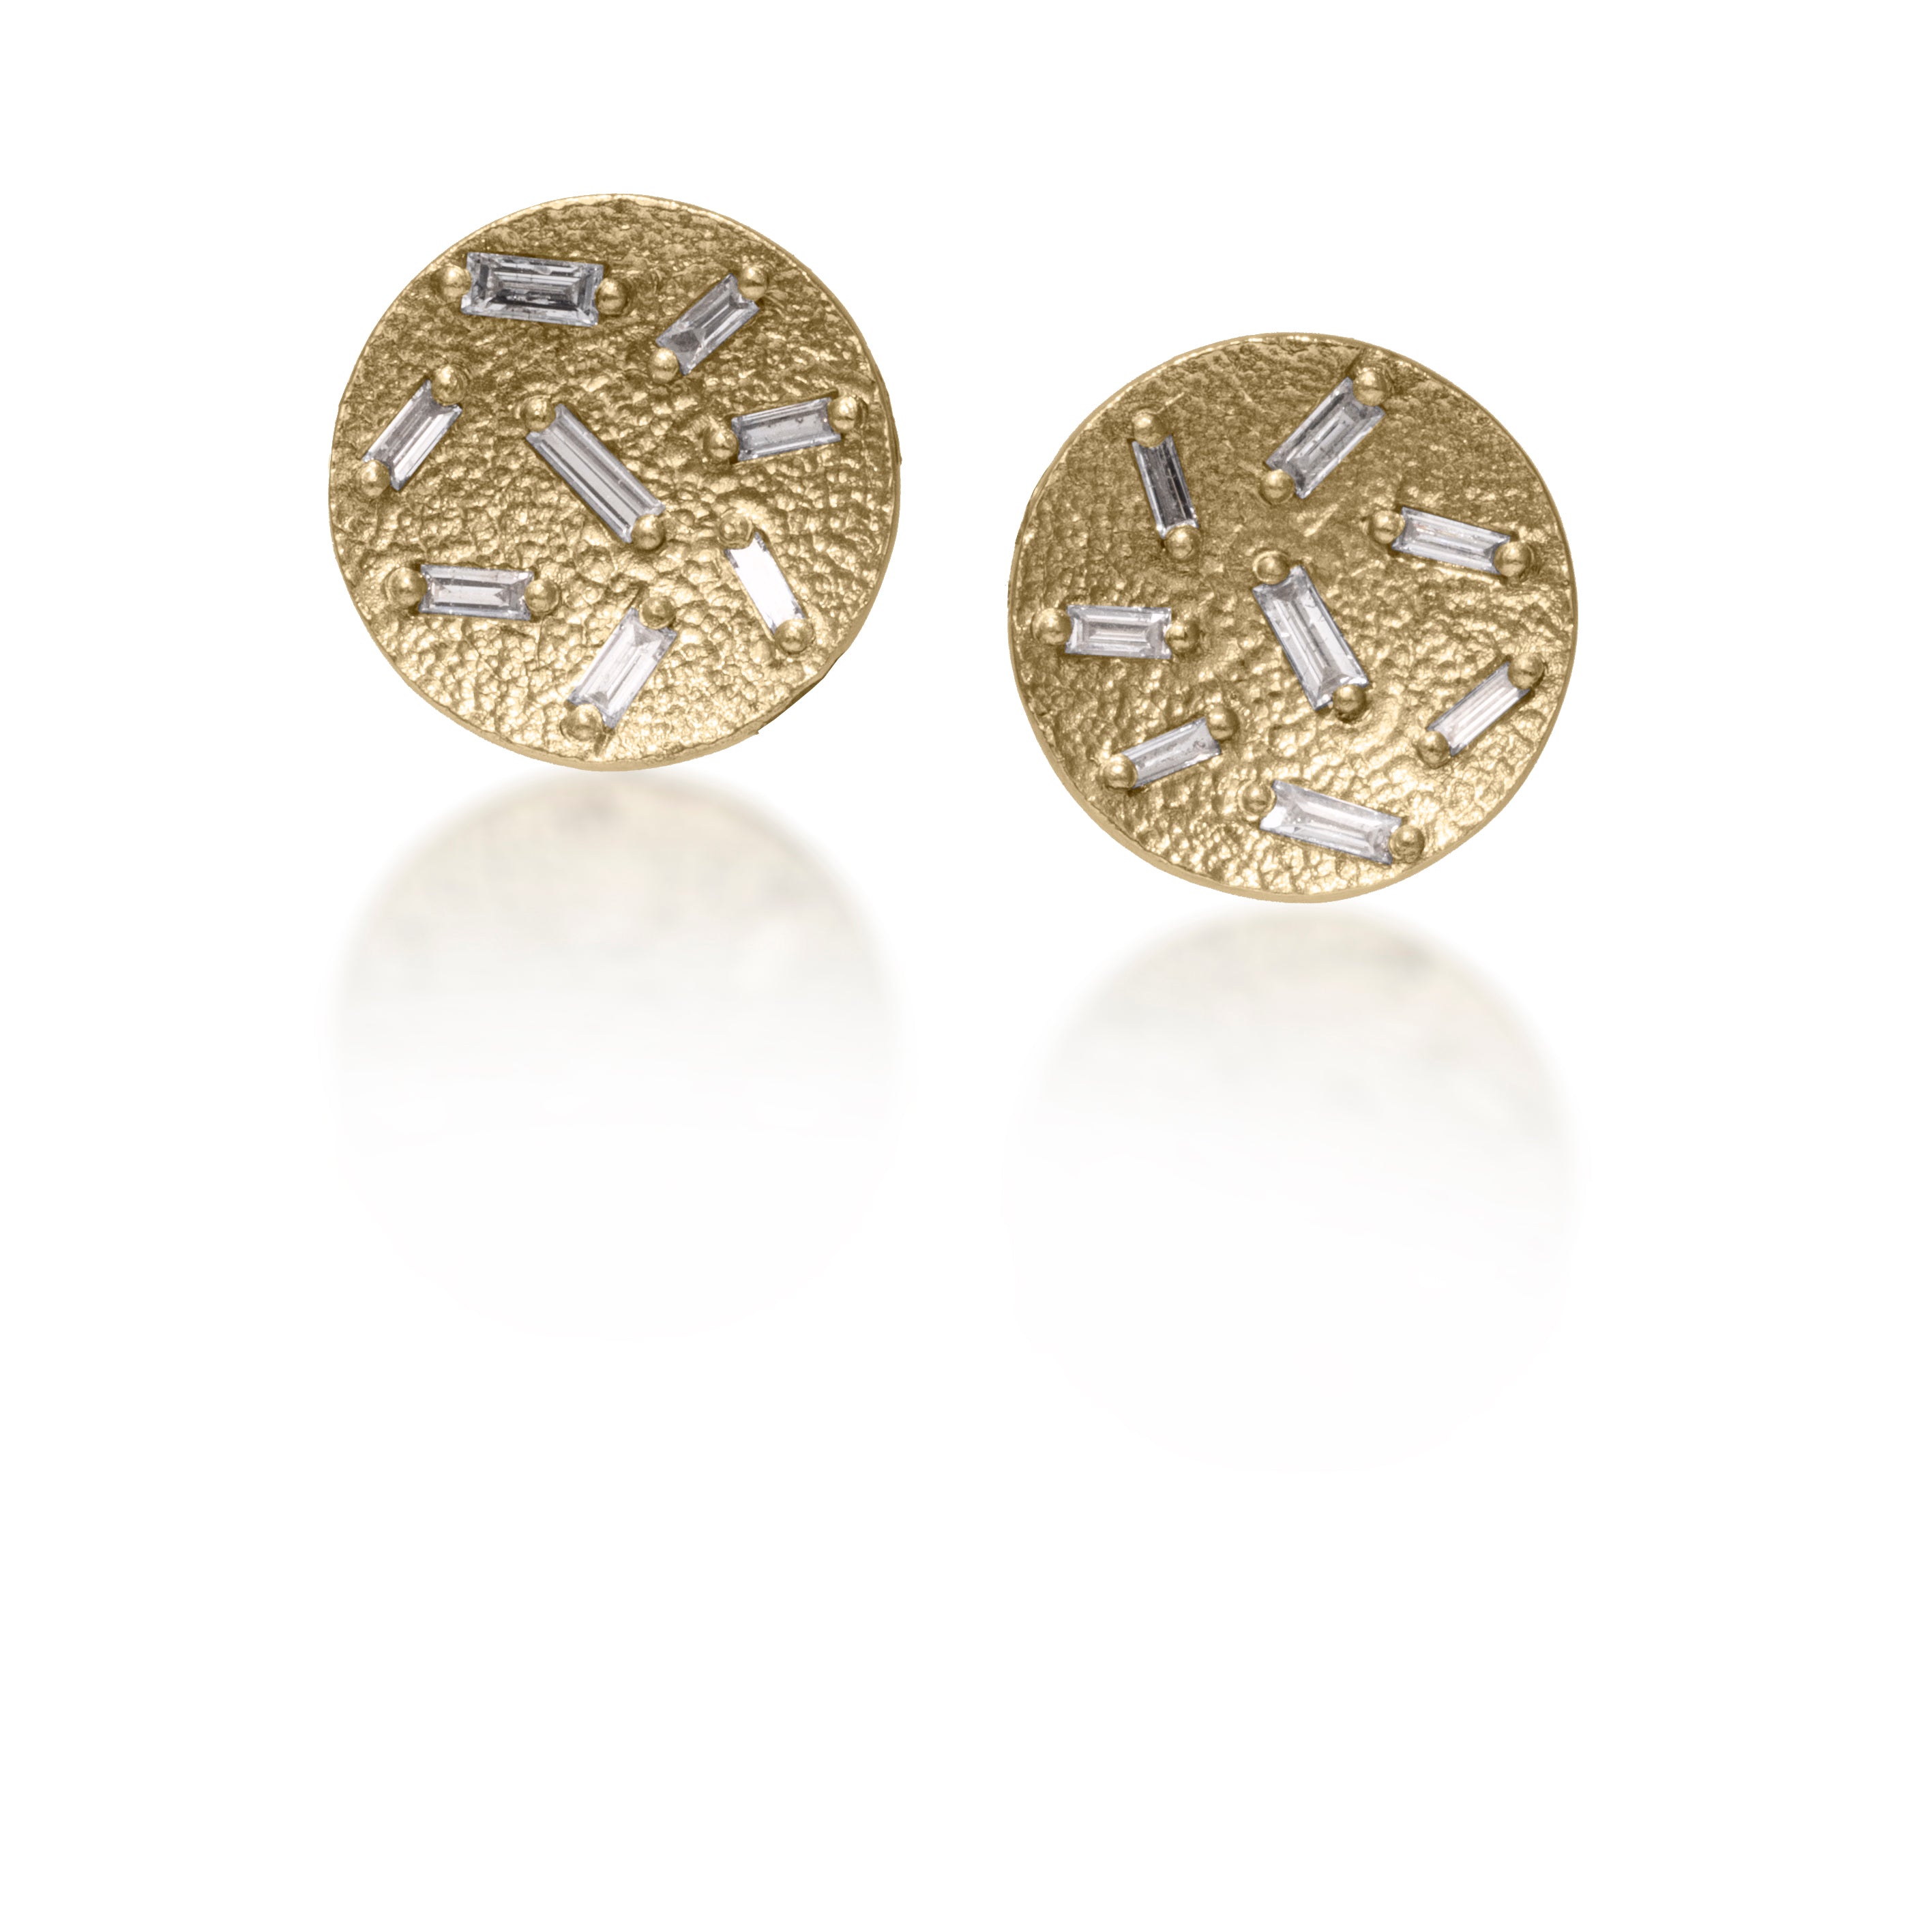 This simple yet elegant post earring is perfect for everyday.  Offered in three richly textured color ways, oxidized sterling, 18k gold, palladium.  Each earring is set with 8 white diamond baguettes. 0.454 tcw.